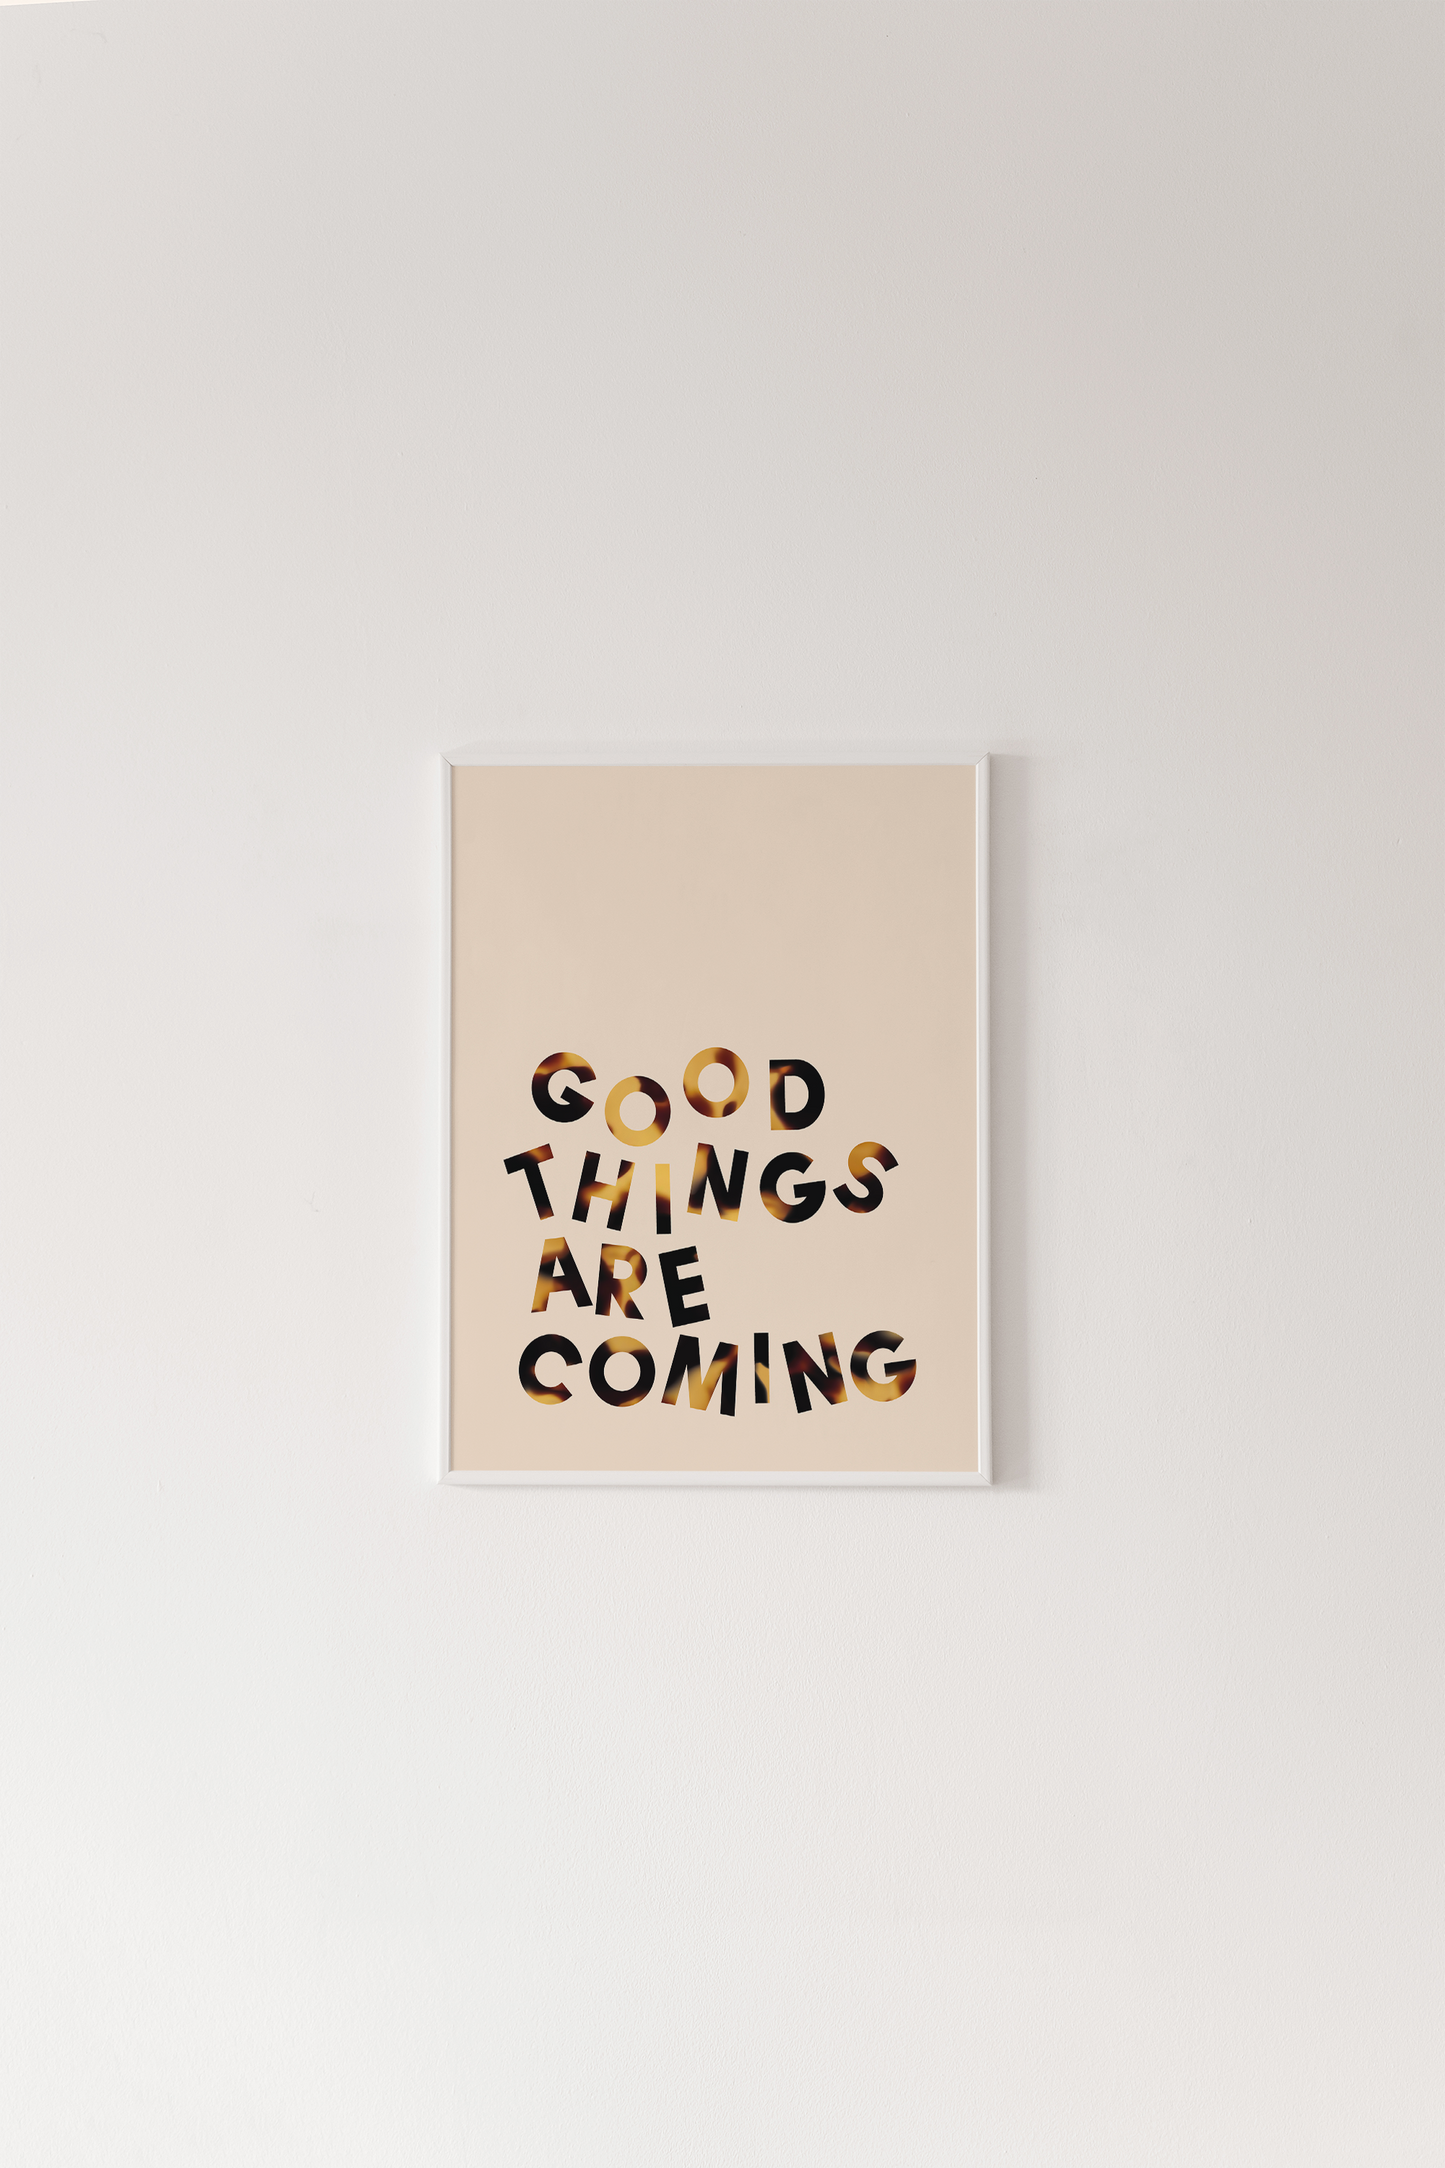 Special Price Good Things Are Coming Print